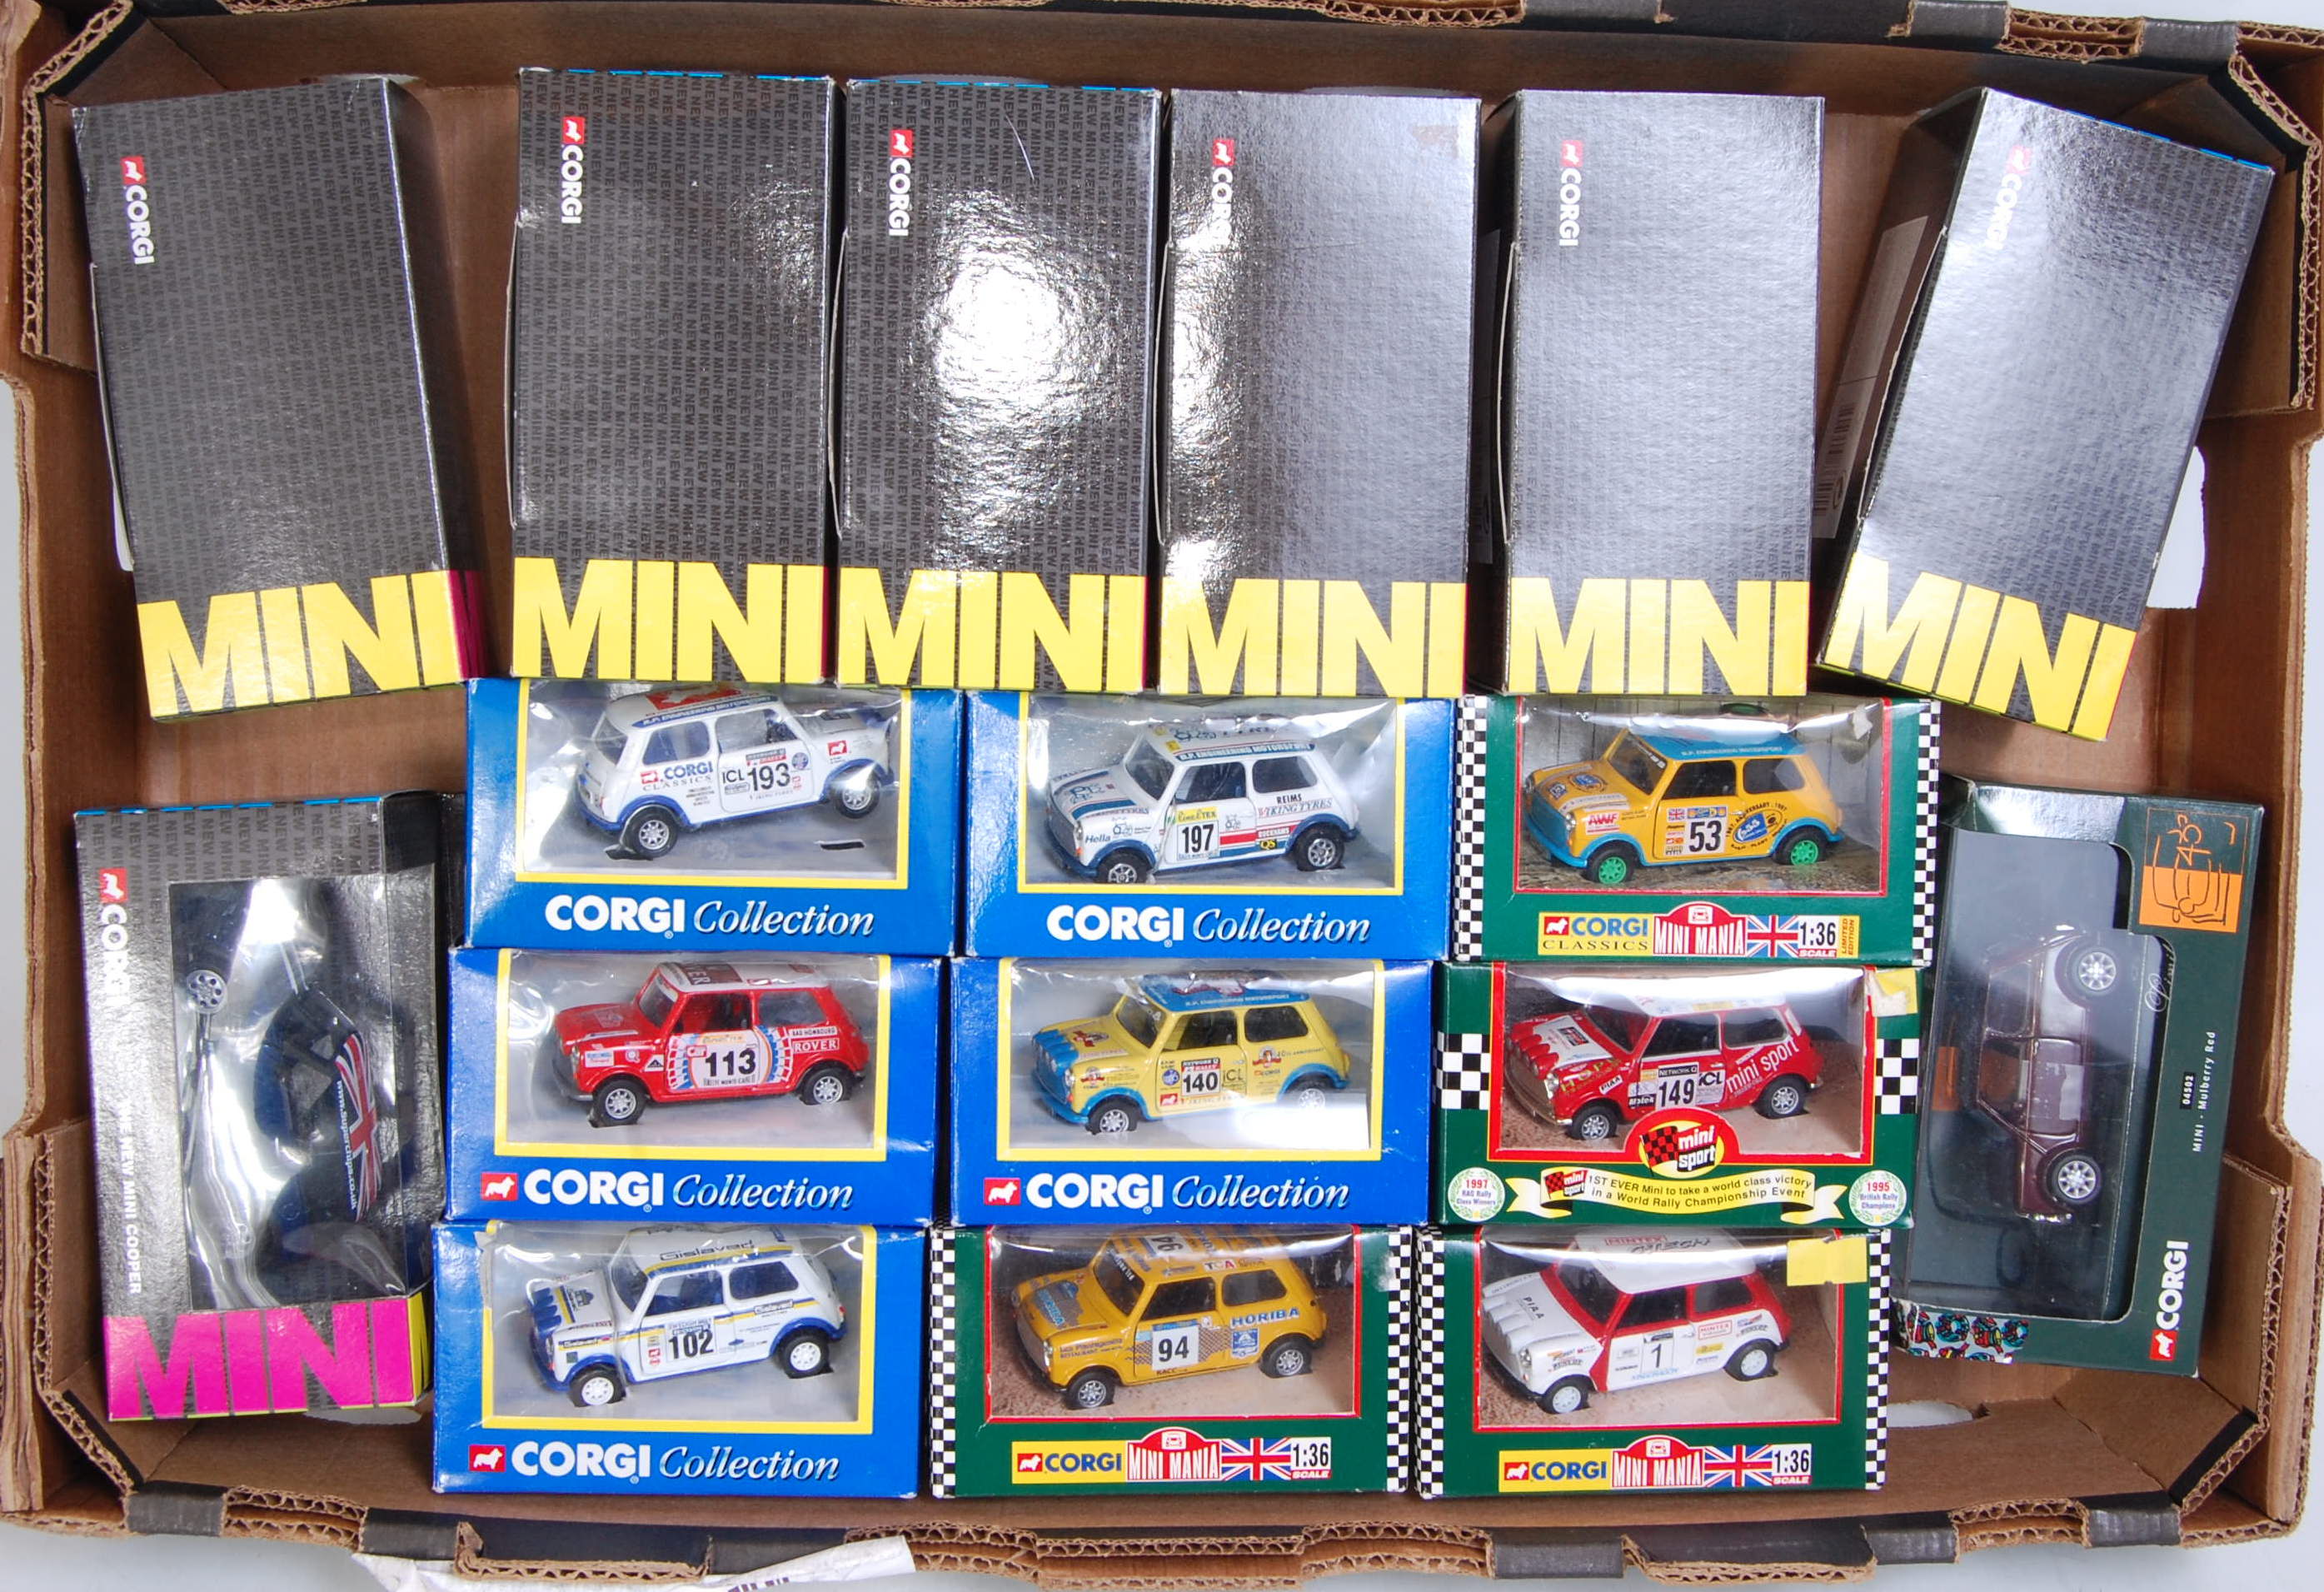 17 various boxed Corgi Modern Release Mini Racing diecasts to include a Mintex Mini National Rally